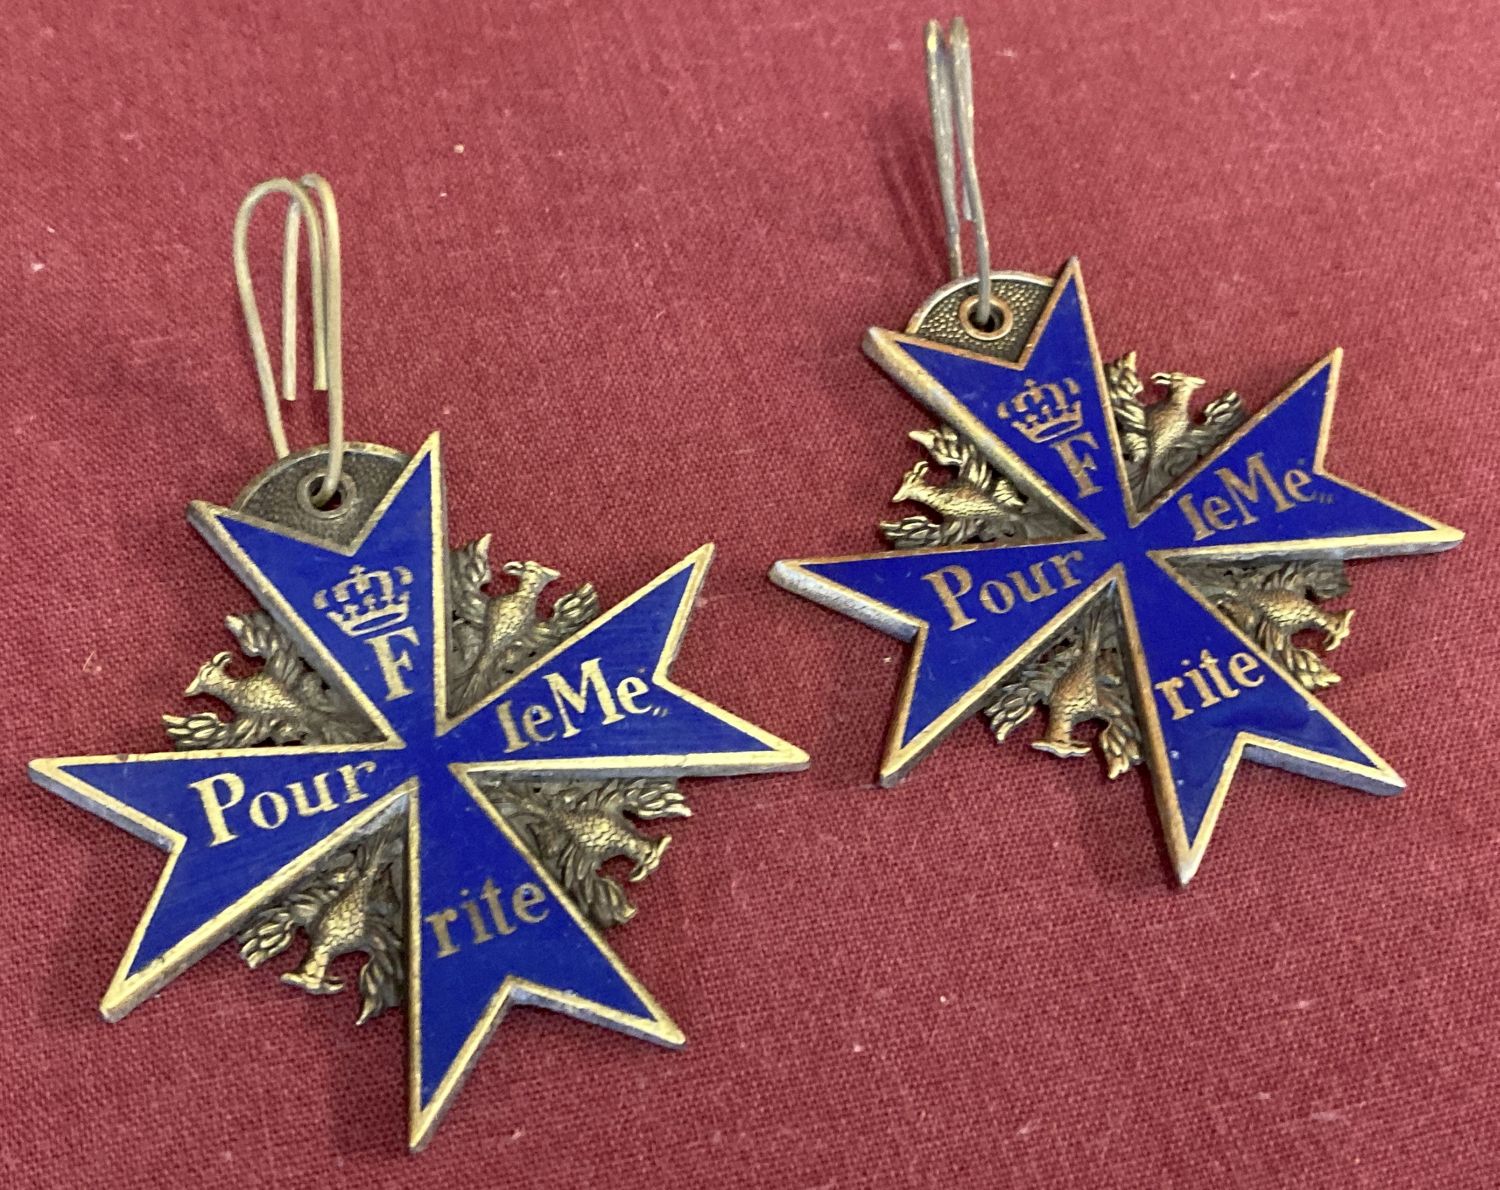 2 reproduction Pour Le Merite medals with blue enamel finish and eagle detail.